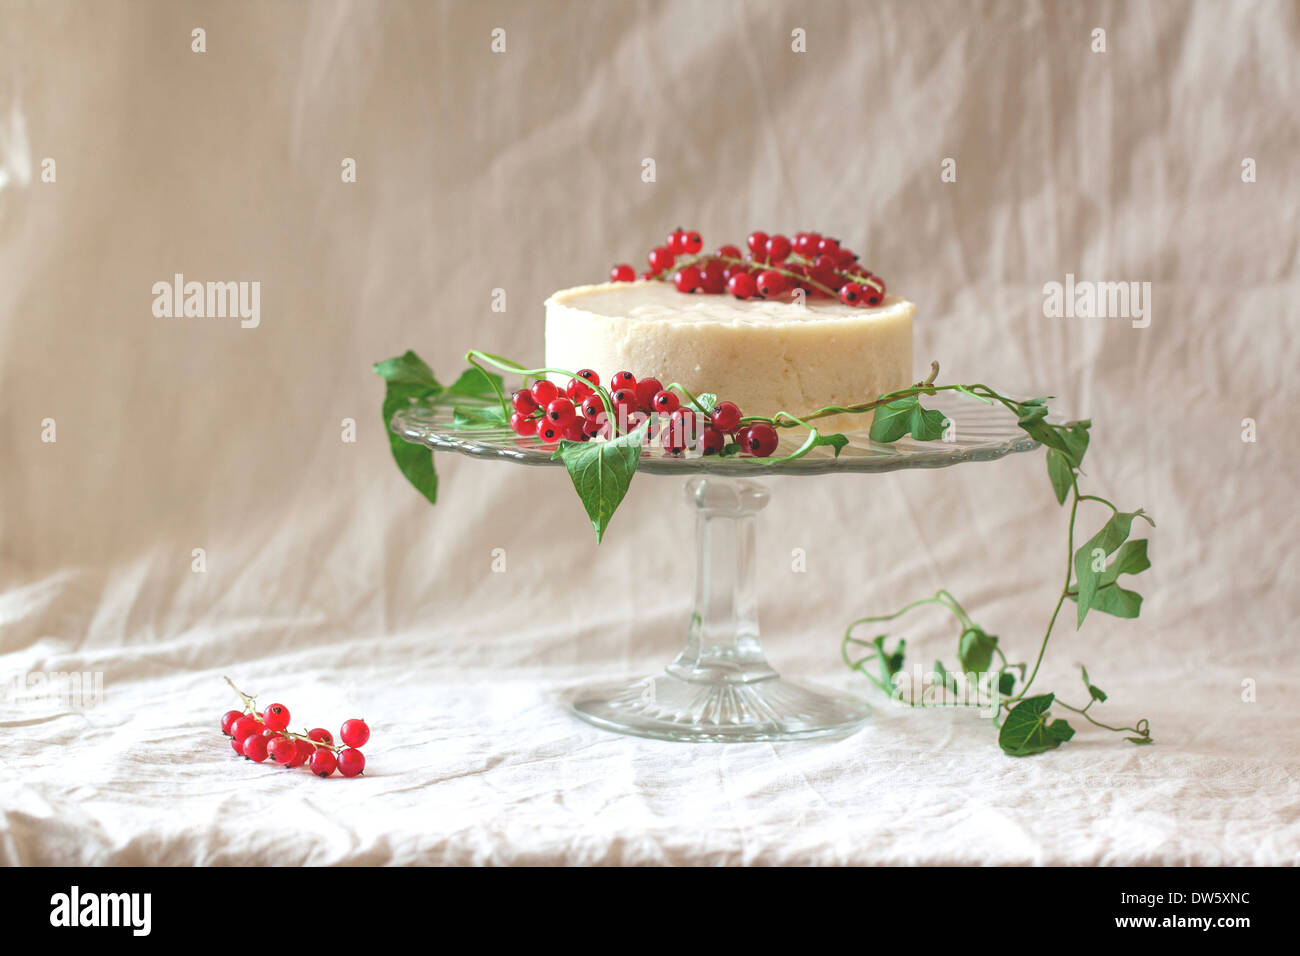 White mousse cake with redcurrants on a glass plate on white cloth Stock Photo